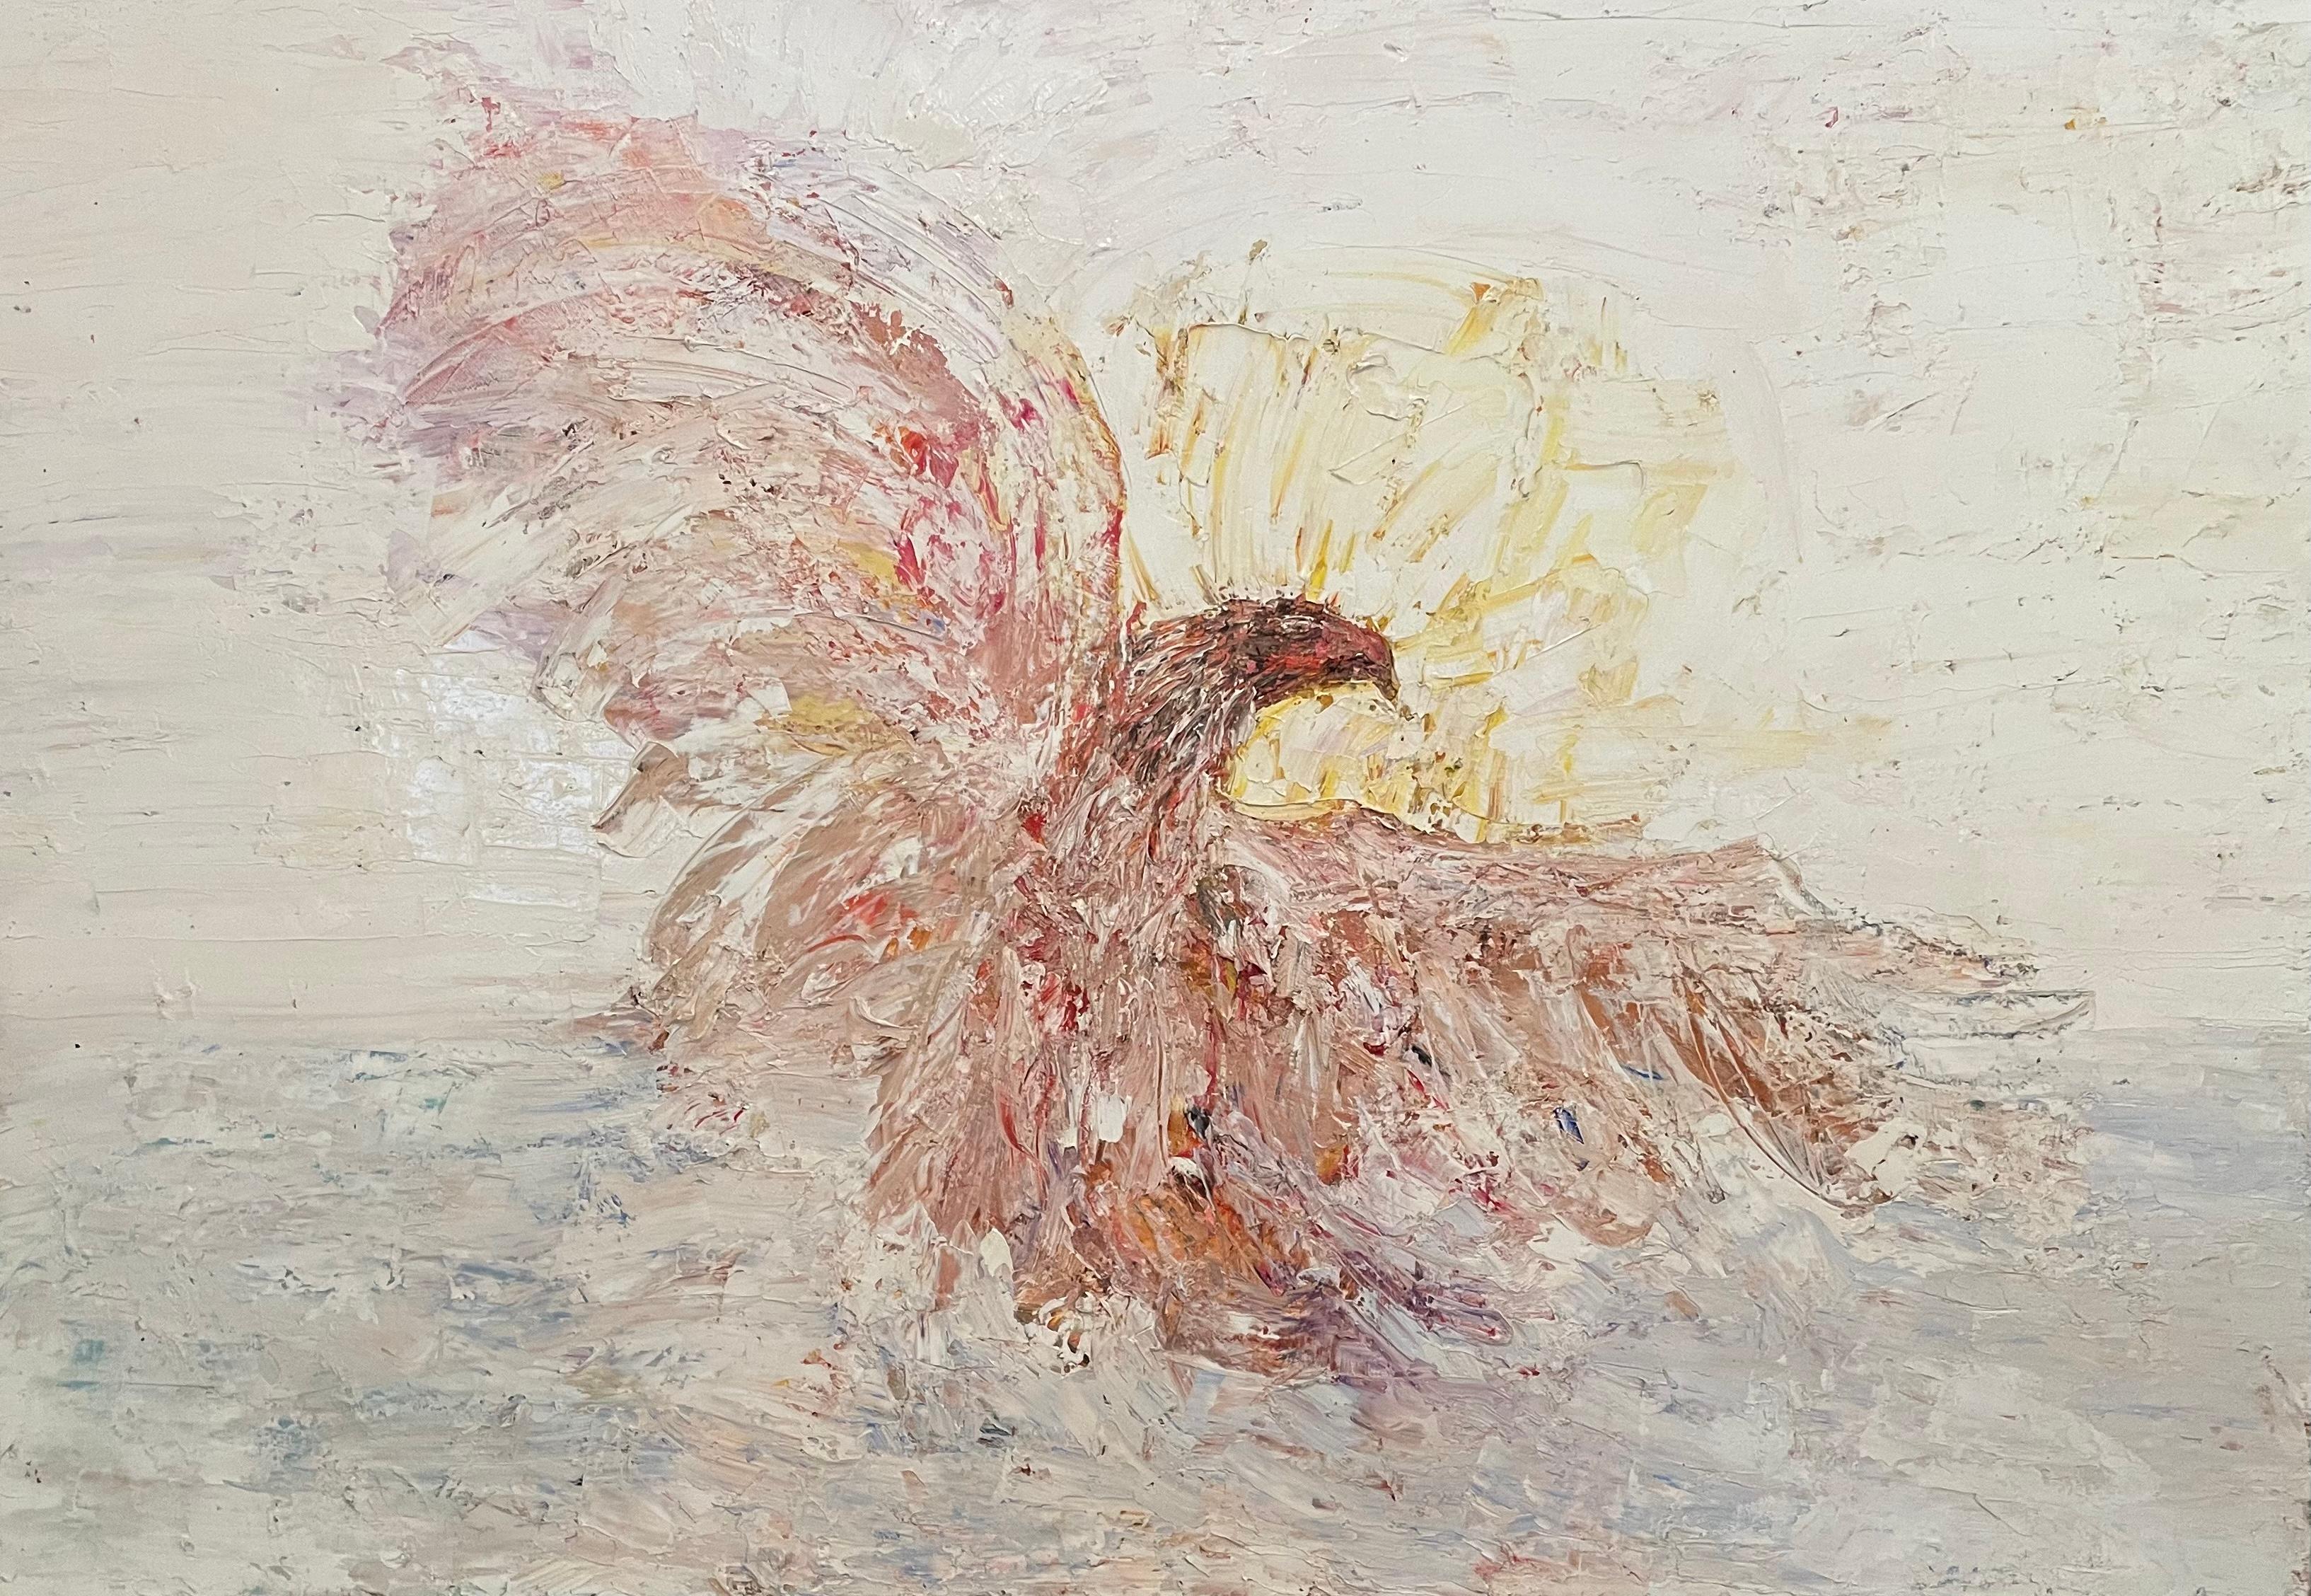 'The Eagle' - Orange and White Large Bird - Abstract Expressionist Oil Painting